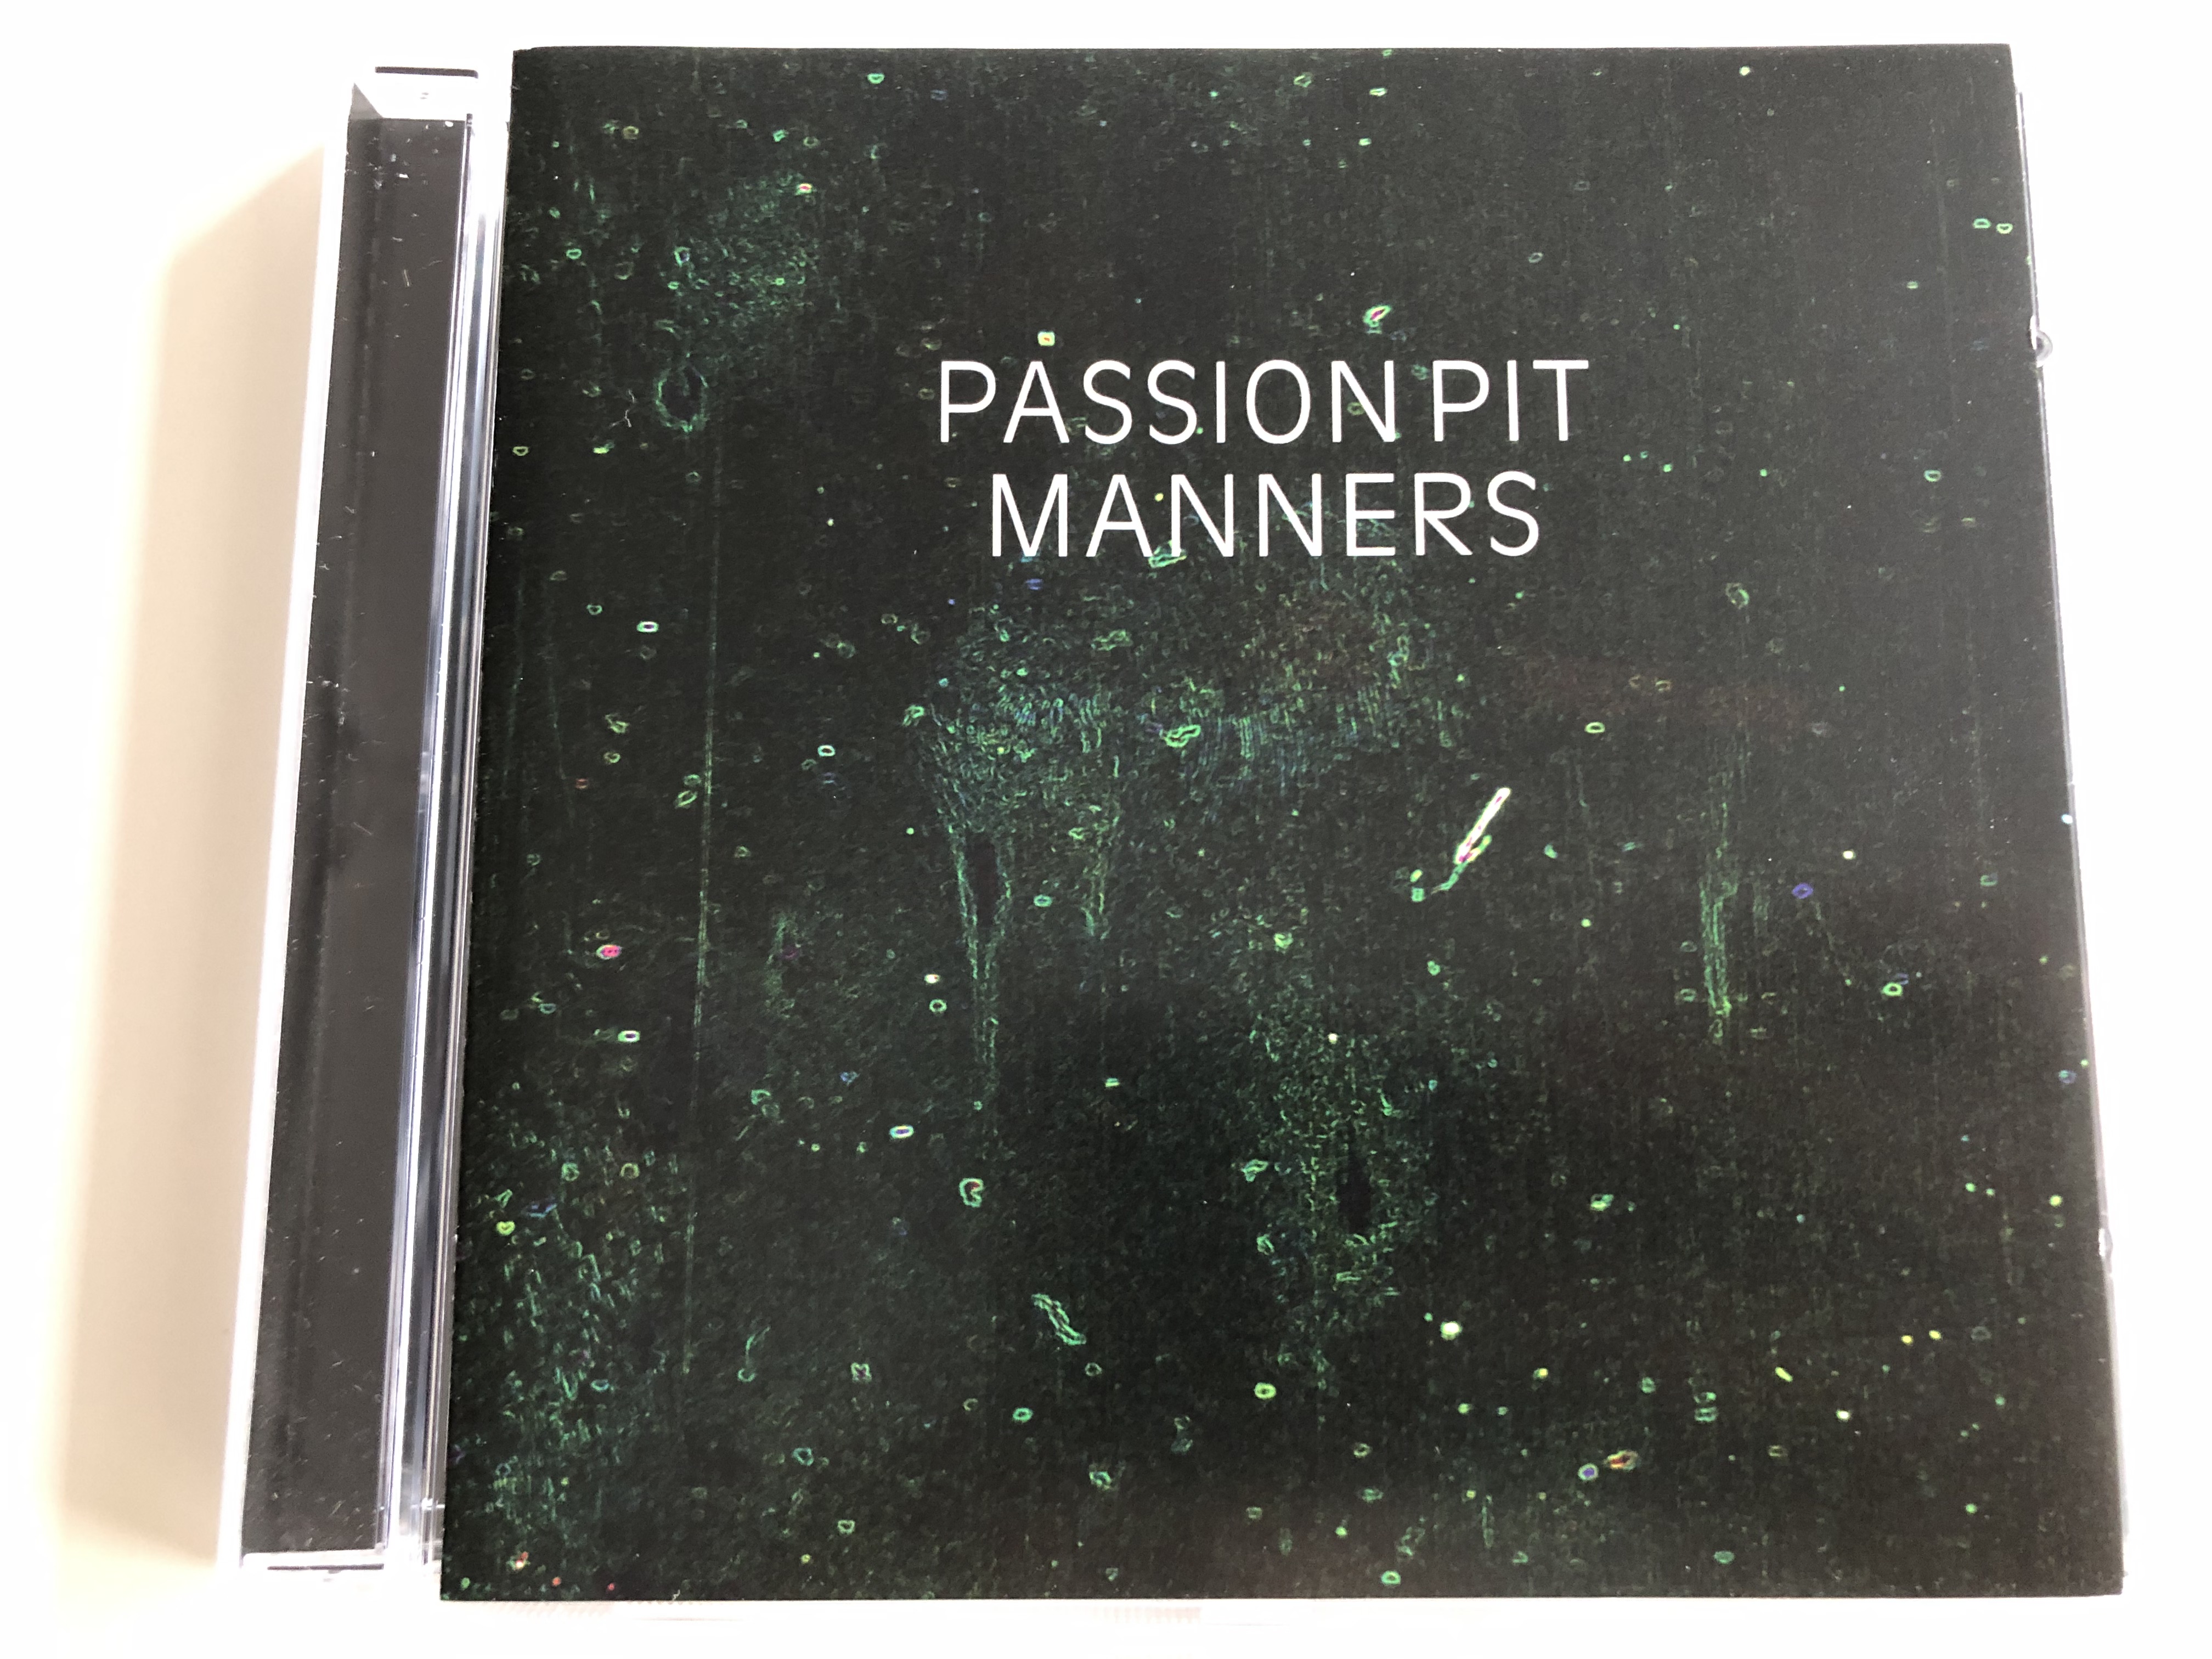 passion-pit-manners-make-light-little-secrets-moth-s-wings-the-reeling-eyes-as-candles-swimming-in-the-flood-to-kingdom-come-audio-cd-2009-columbia-records-1-.jpg